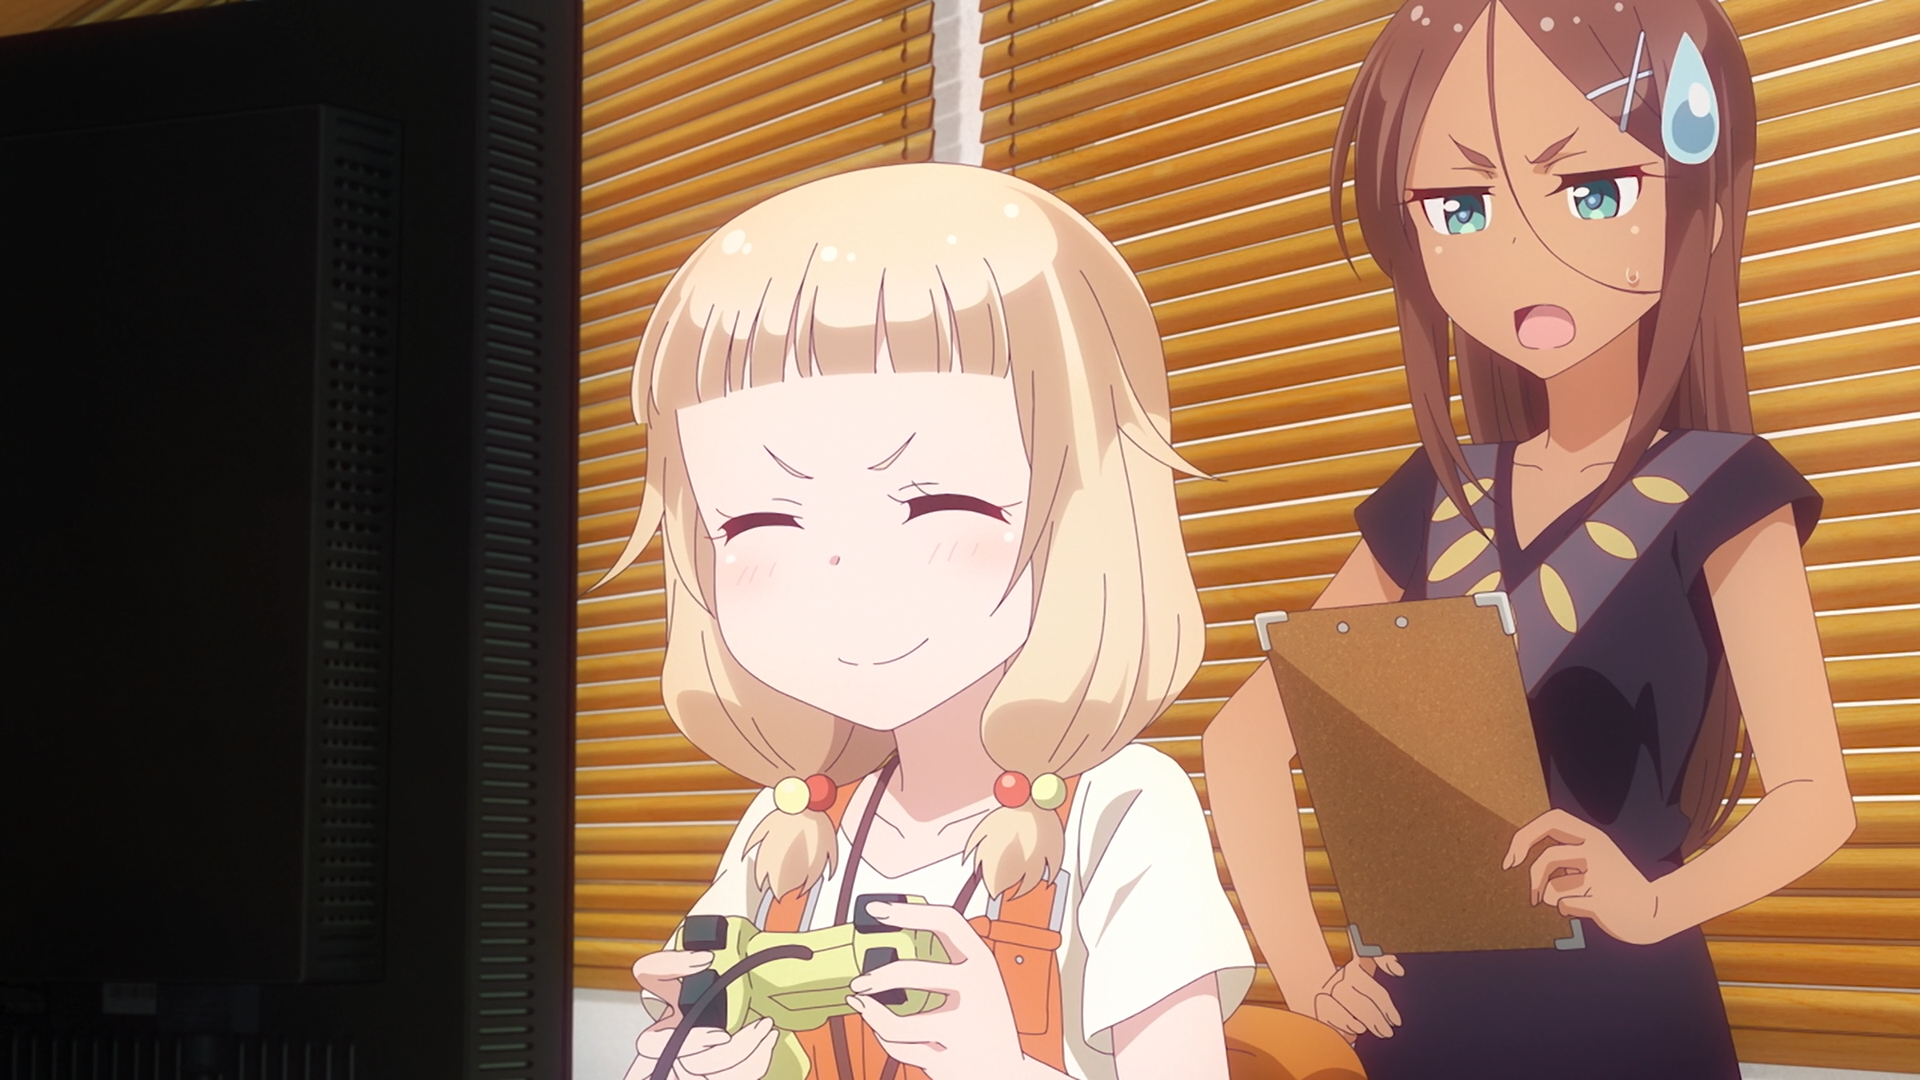 New Game! Episode 9. New Game!